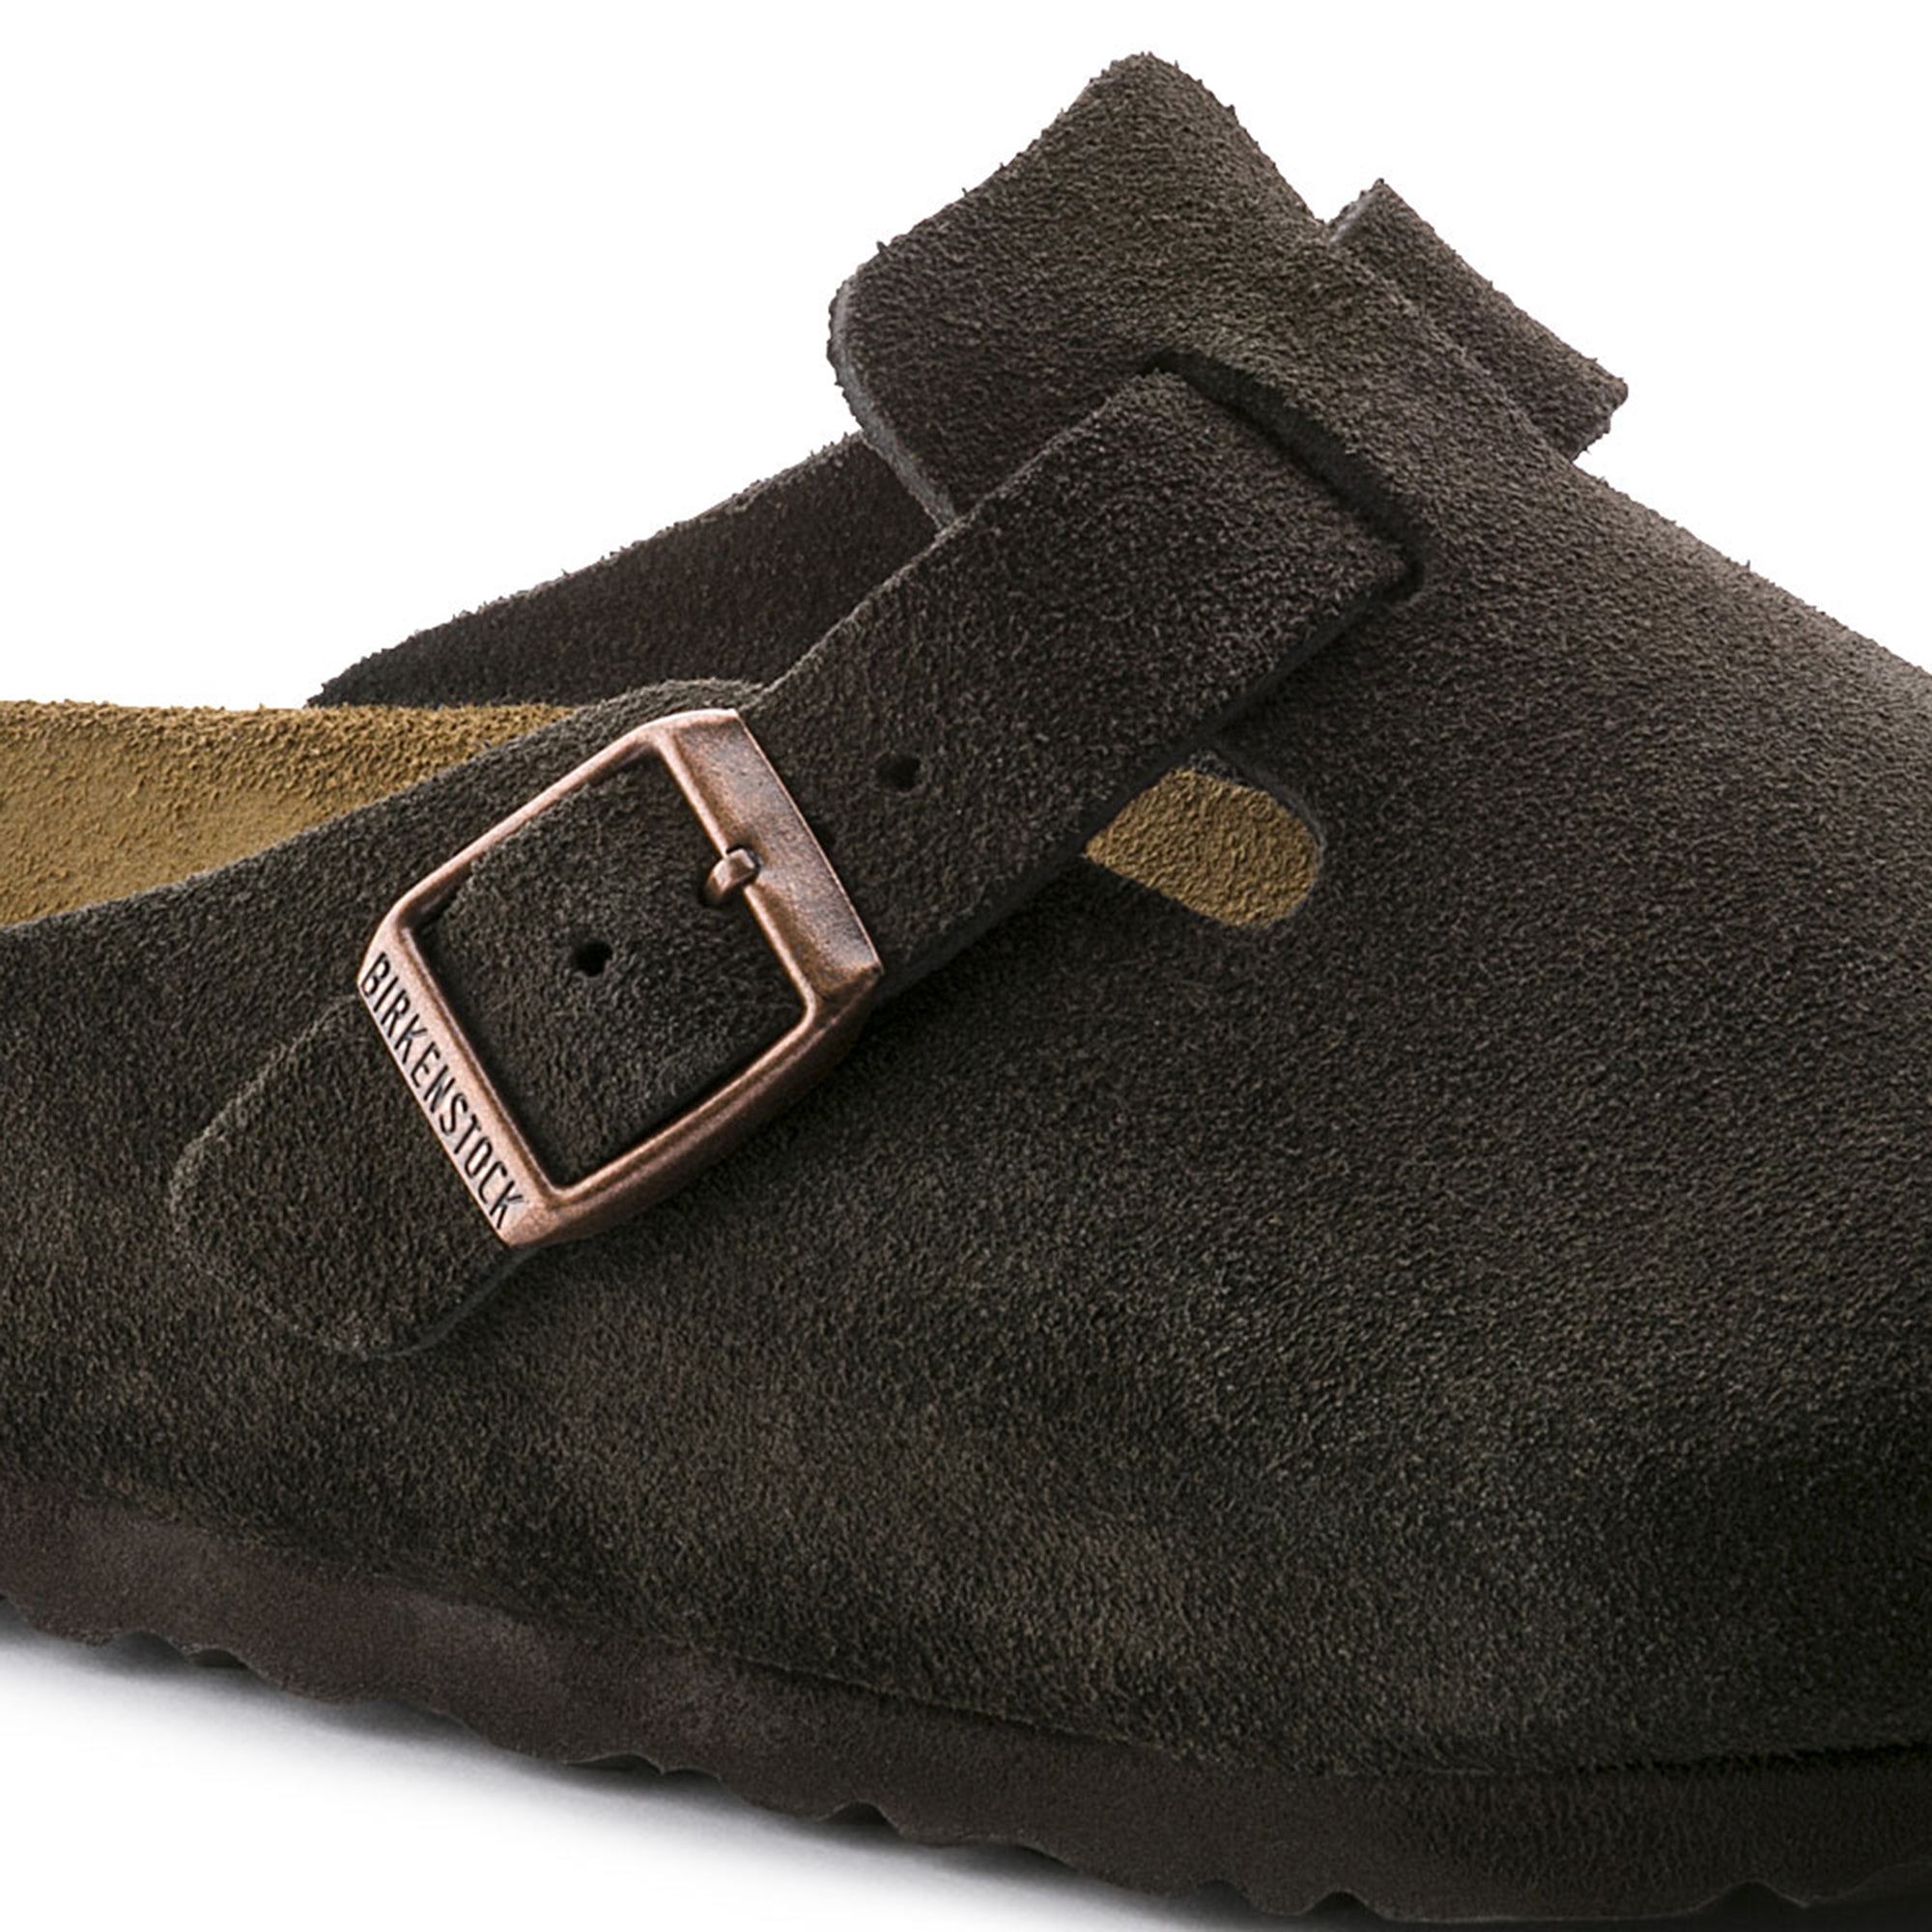 Boston Suede Leather in Mocca (Soft Footbed)